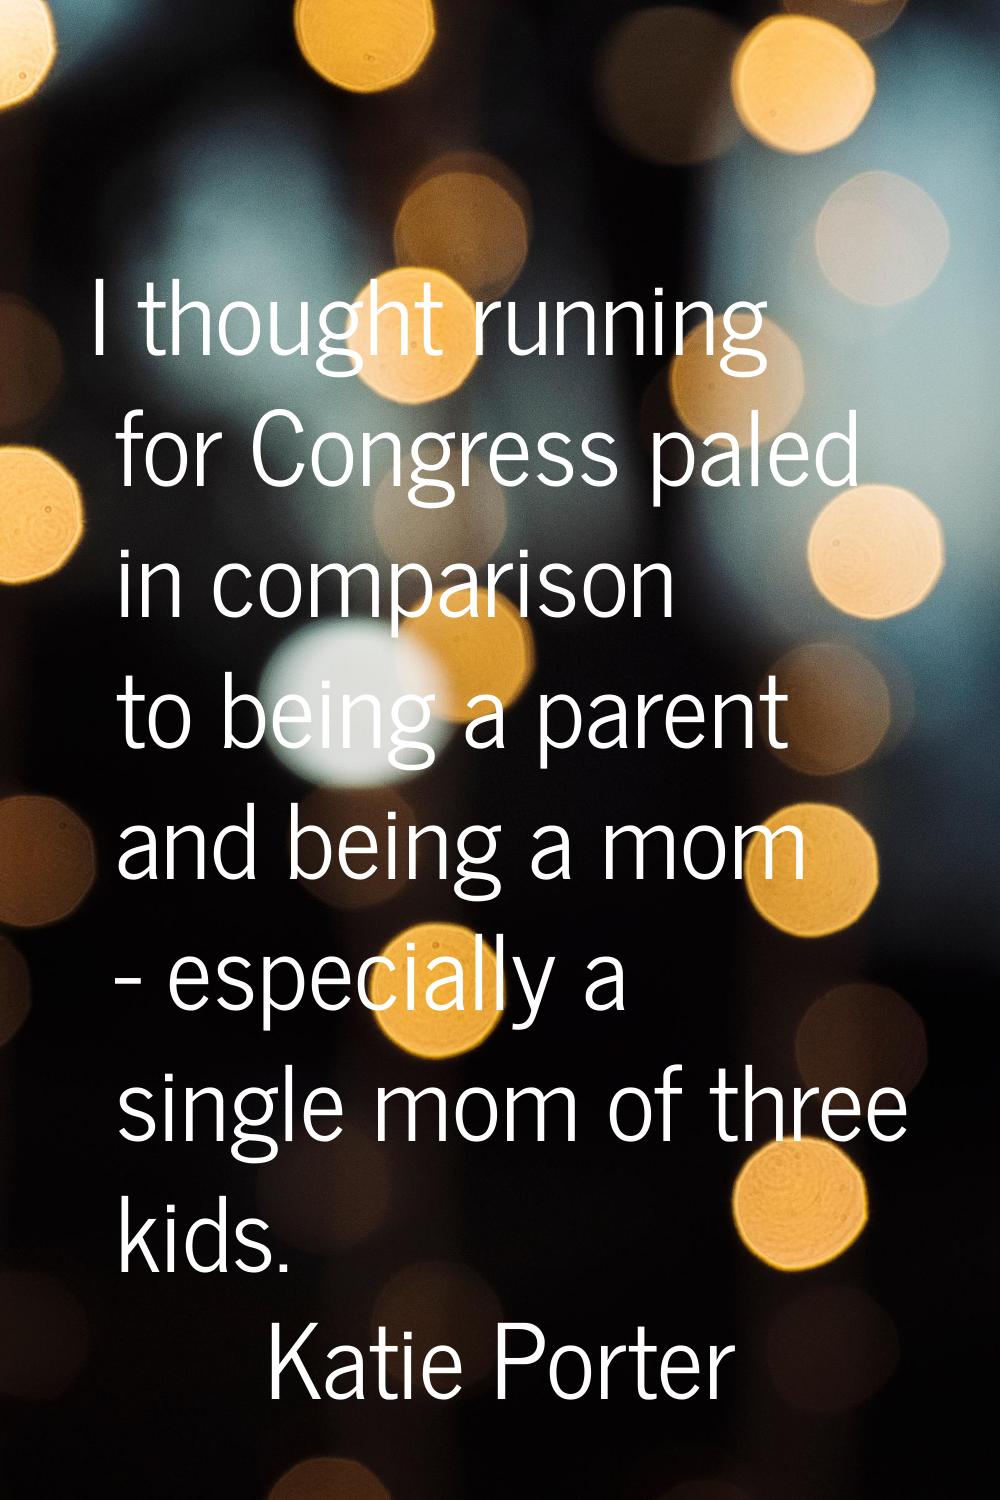 I thought running for Congress paled in comparison to being a parent and being a mom - especially a